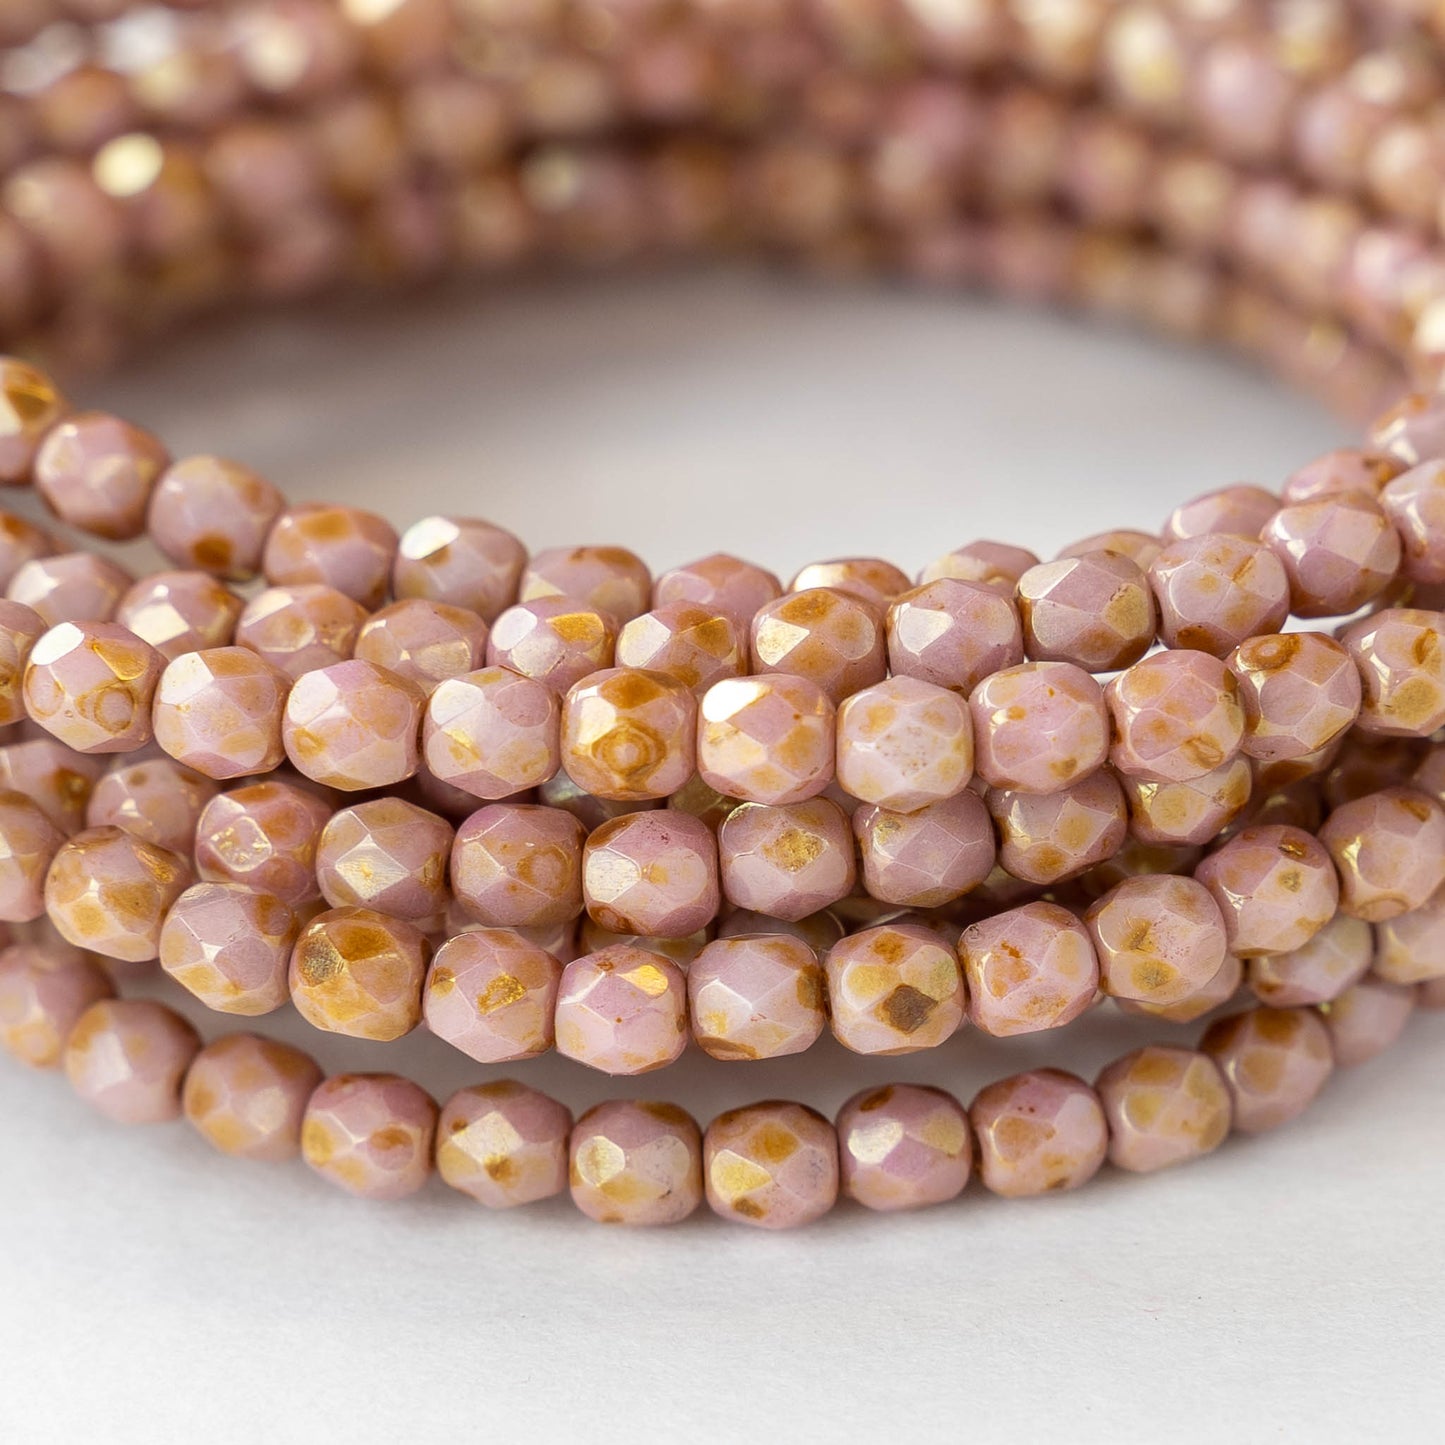 4mm Round Firepolished Beads - Mauve Pink Picassso - 50 Beads